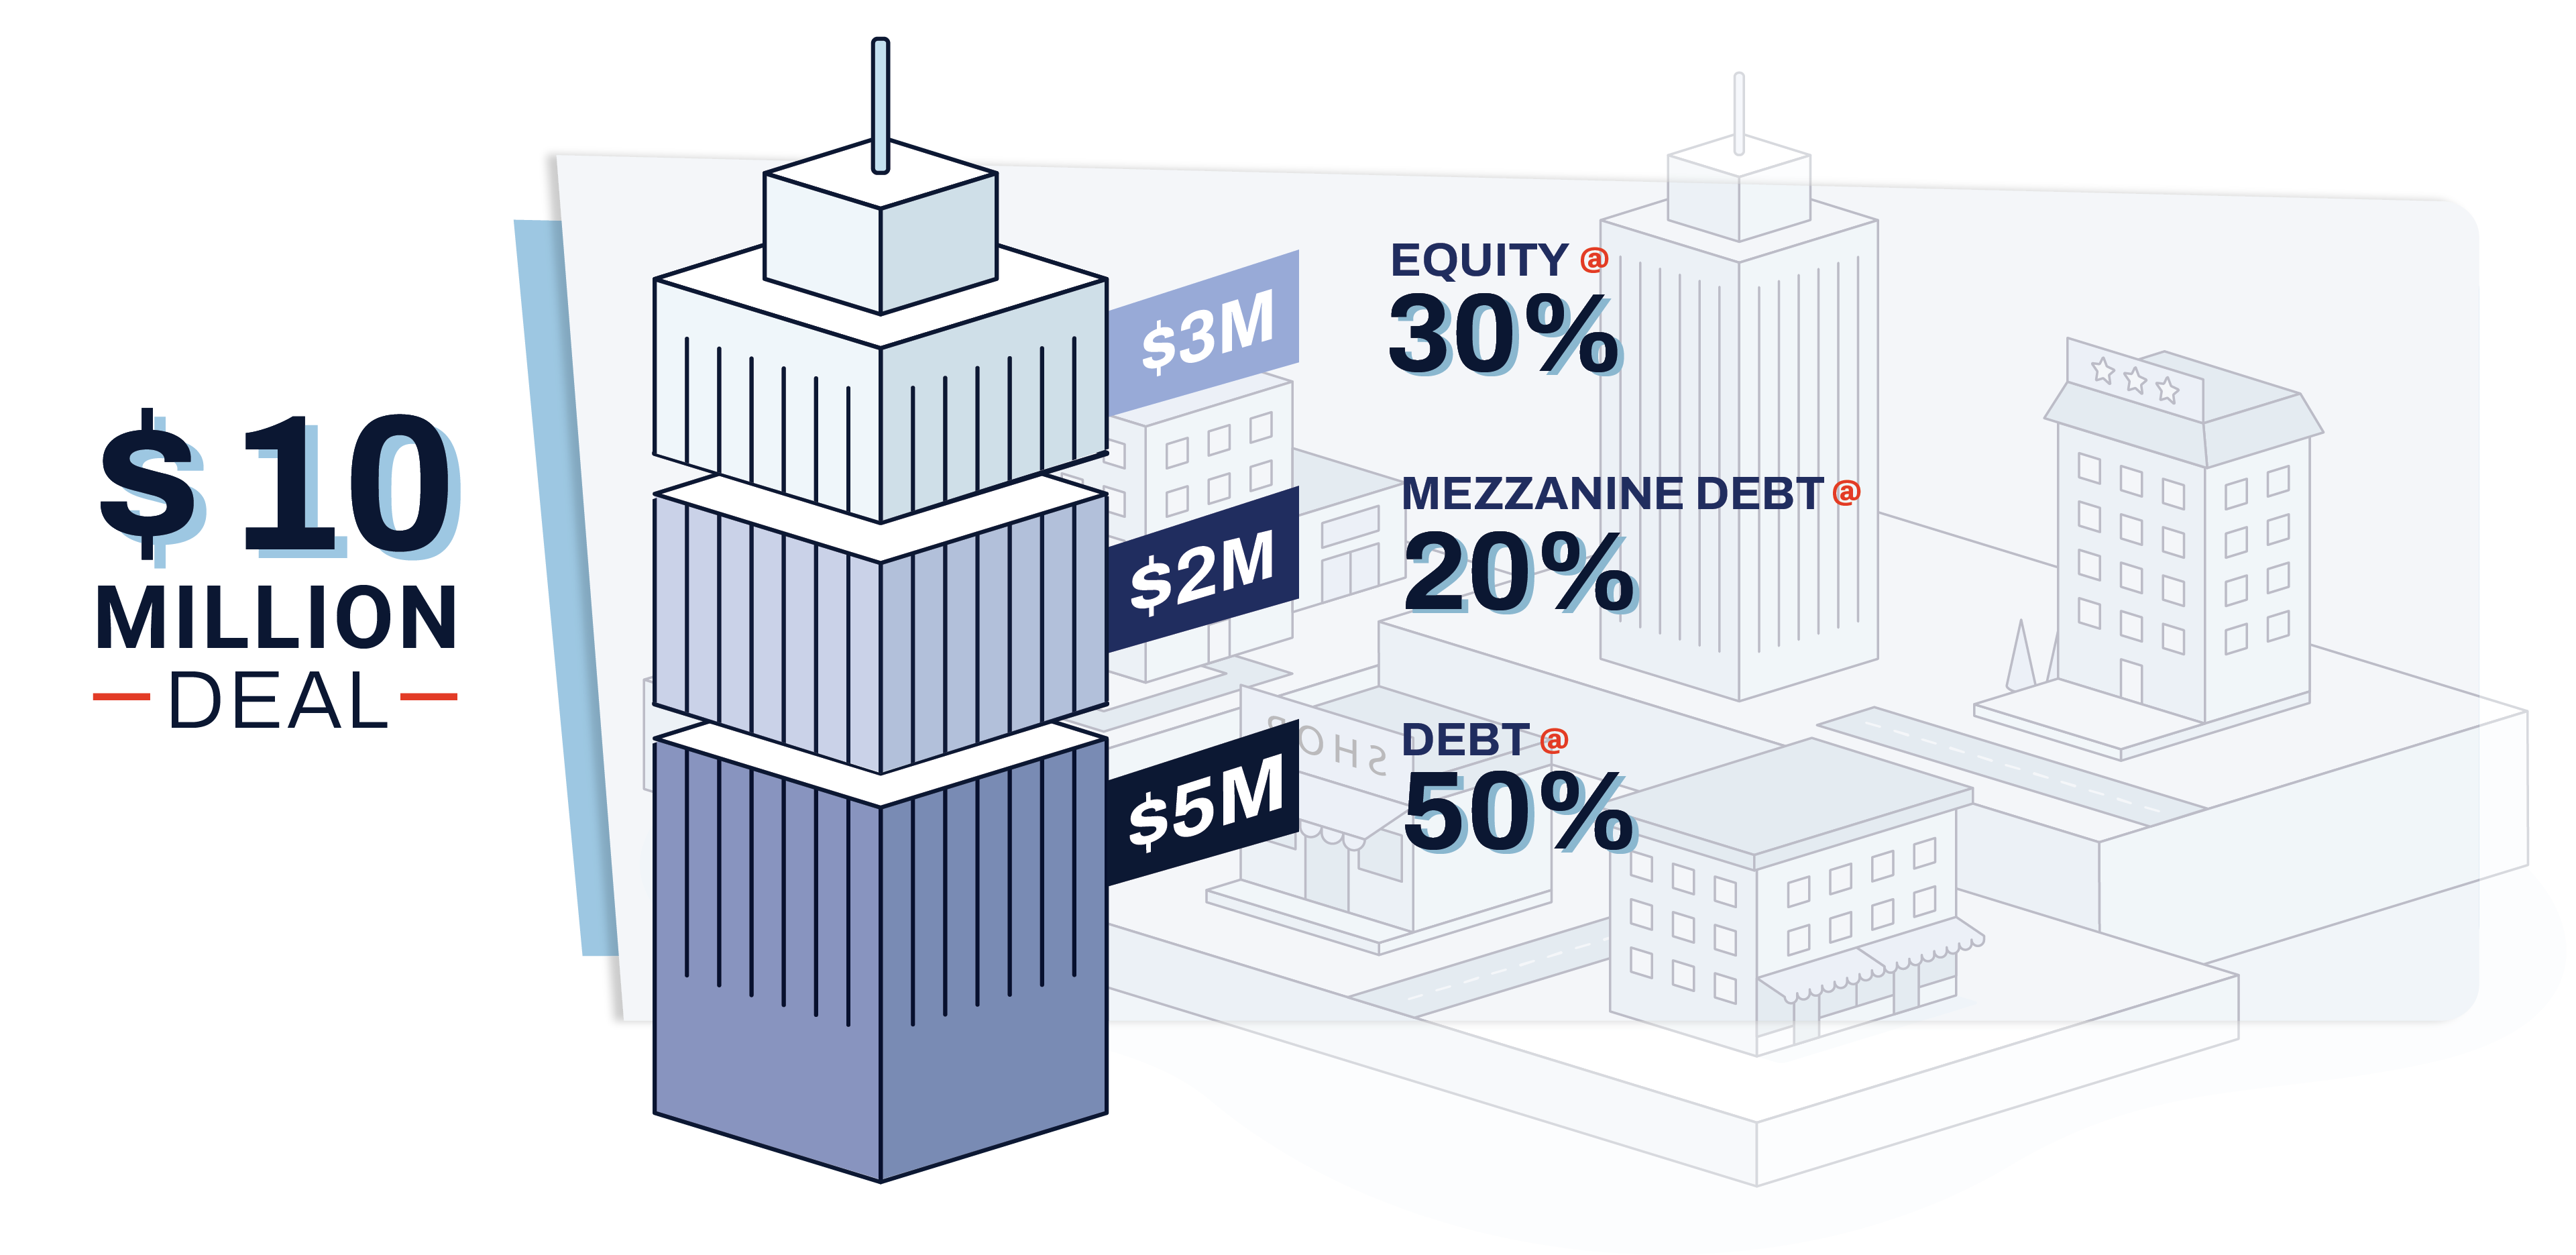 An image of a capital stack that uses 50% debt, 30% equity, and 20% mezzanine debt in a CRE deal